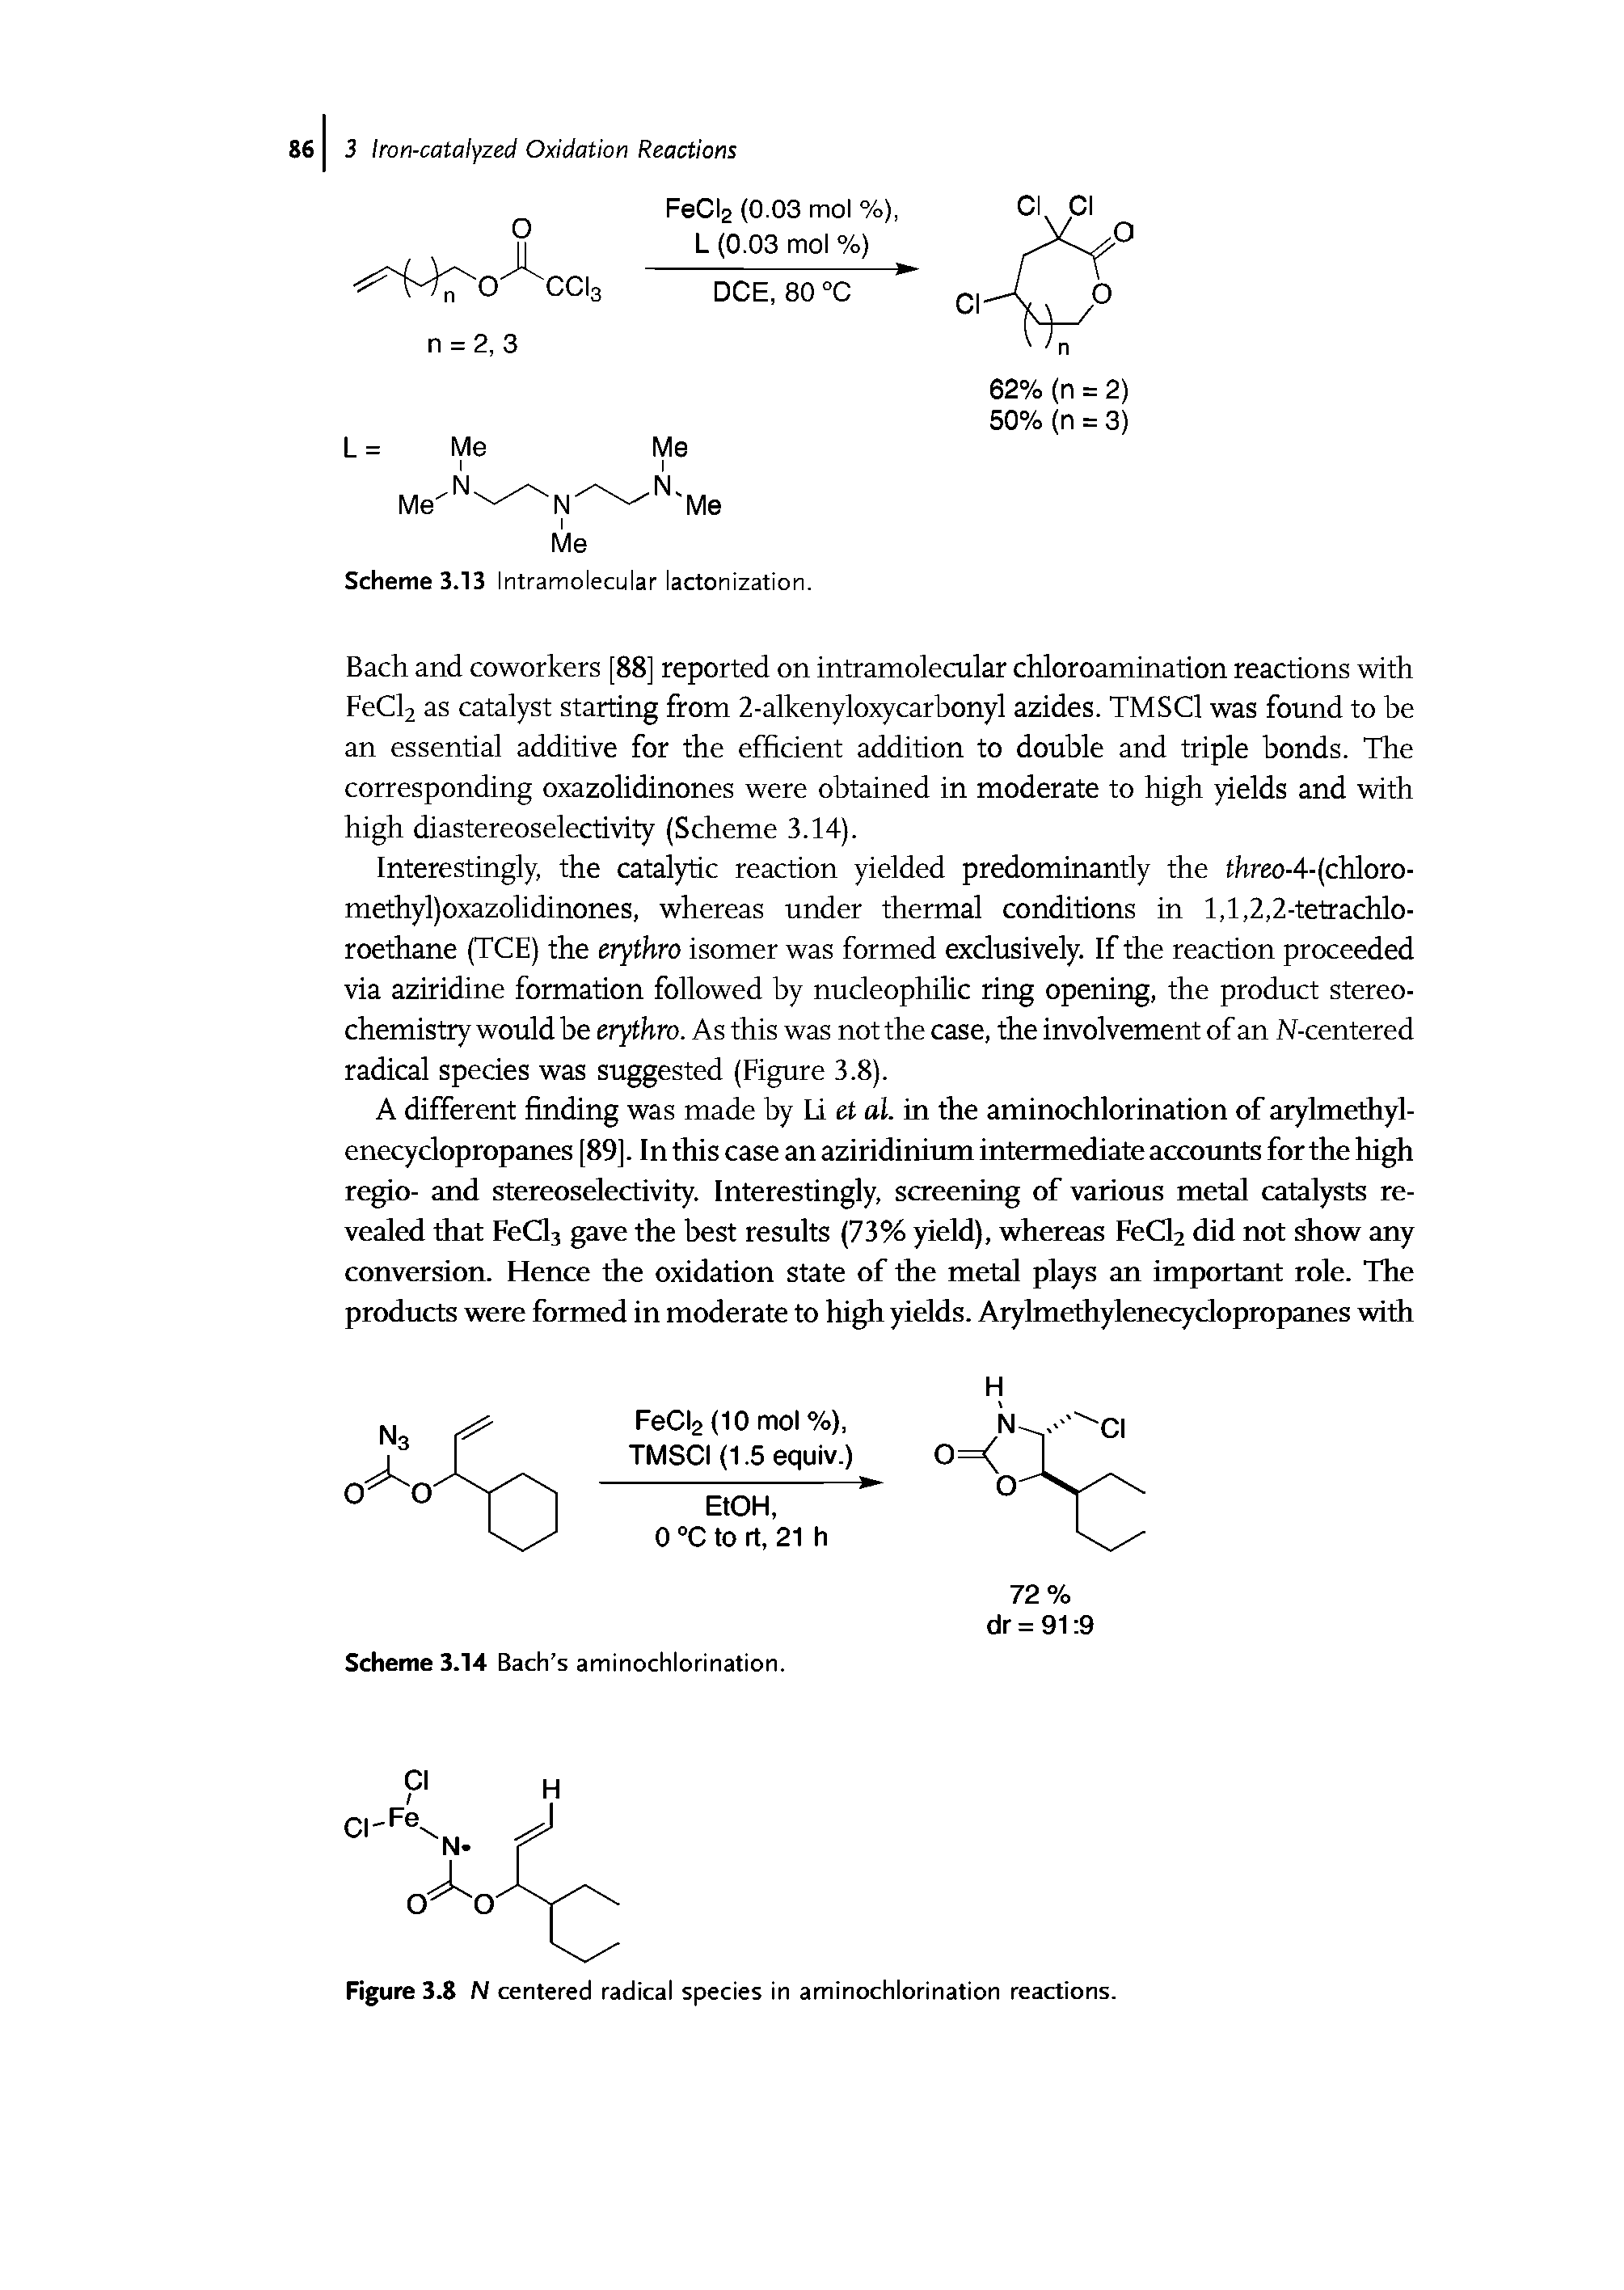 Figure 3.8 N centered radical species in aminochlorination reactions.